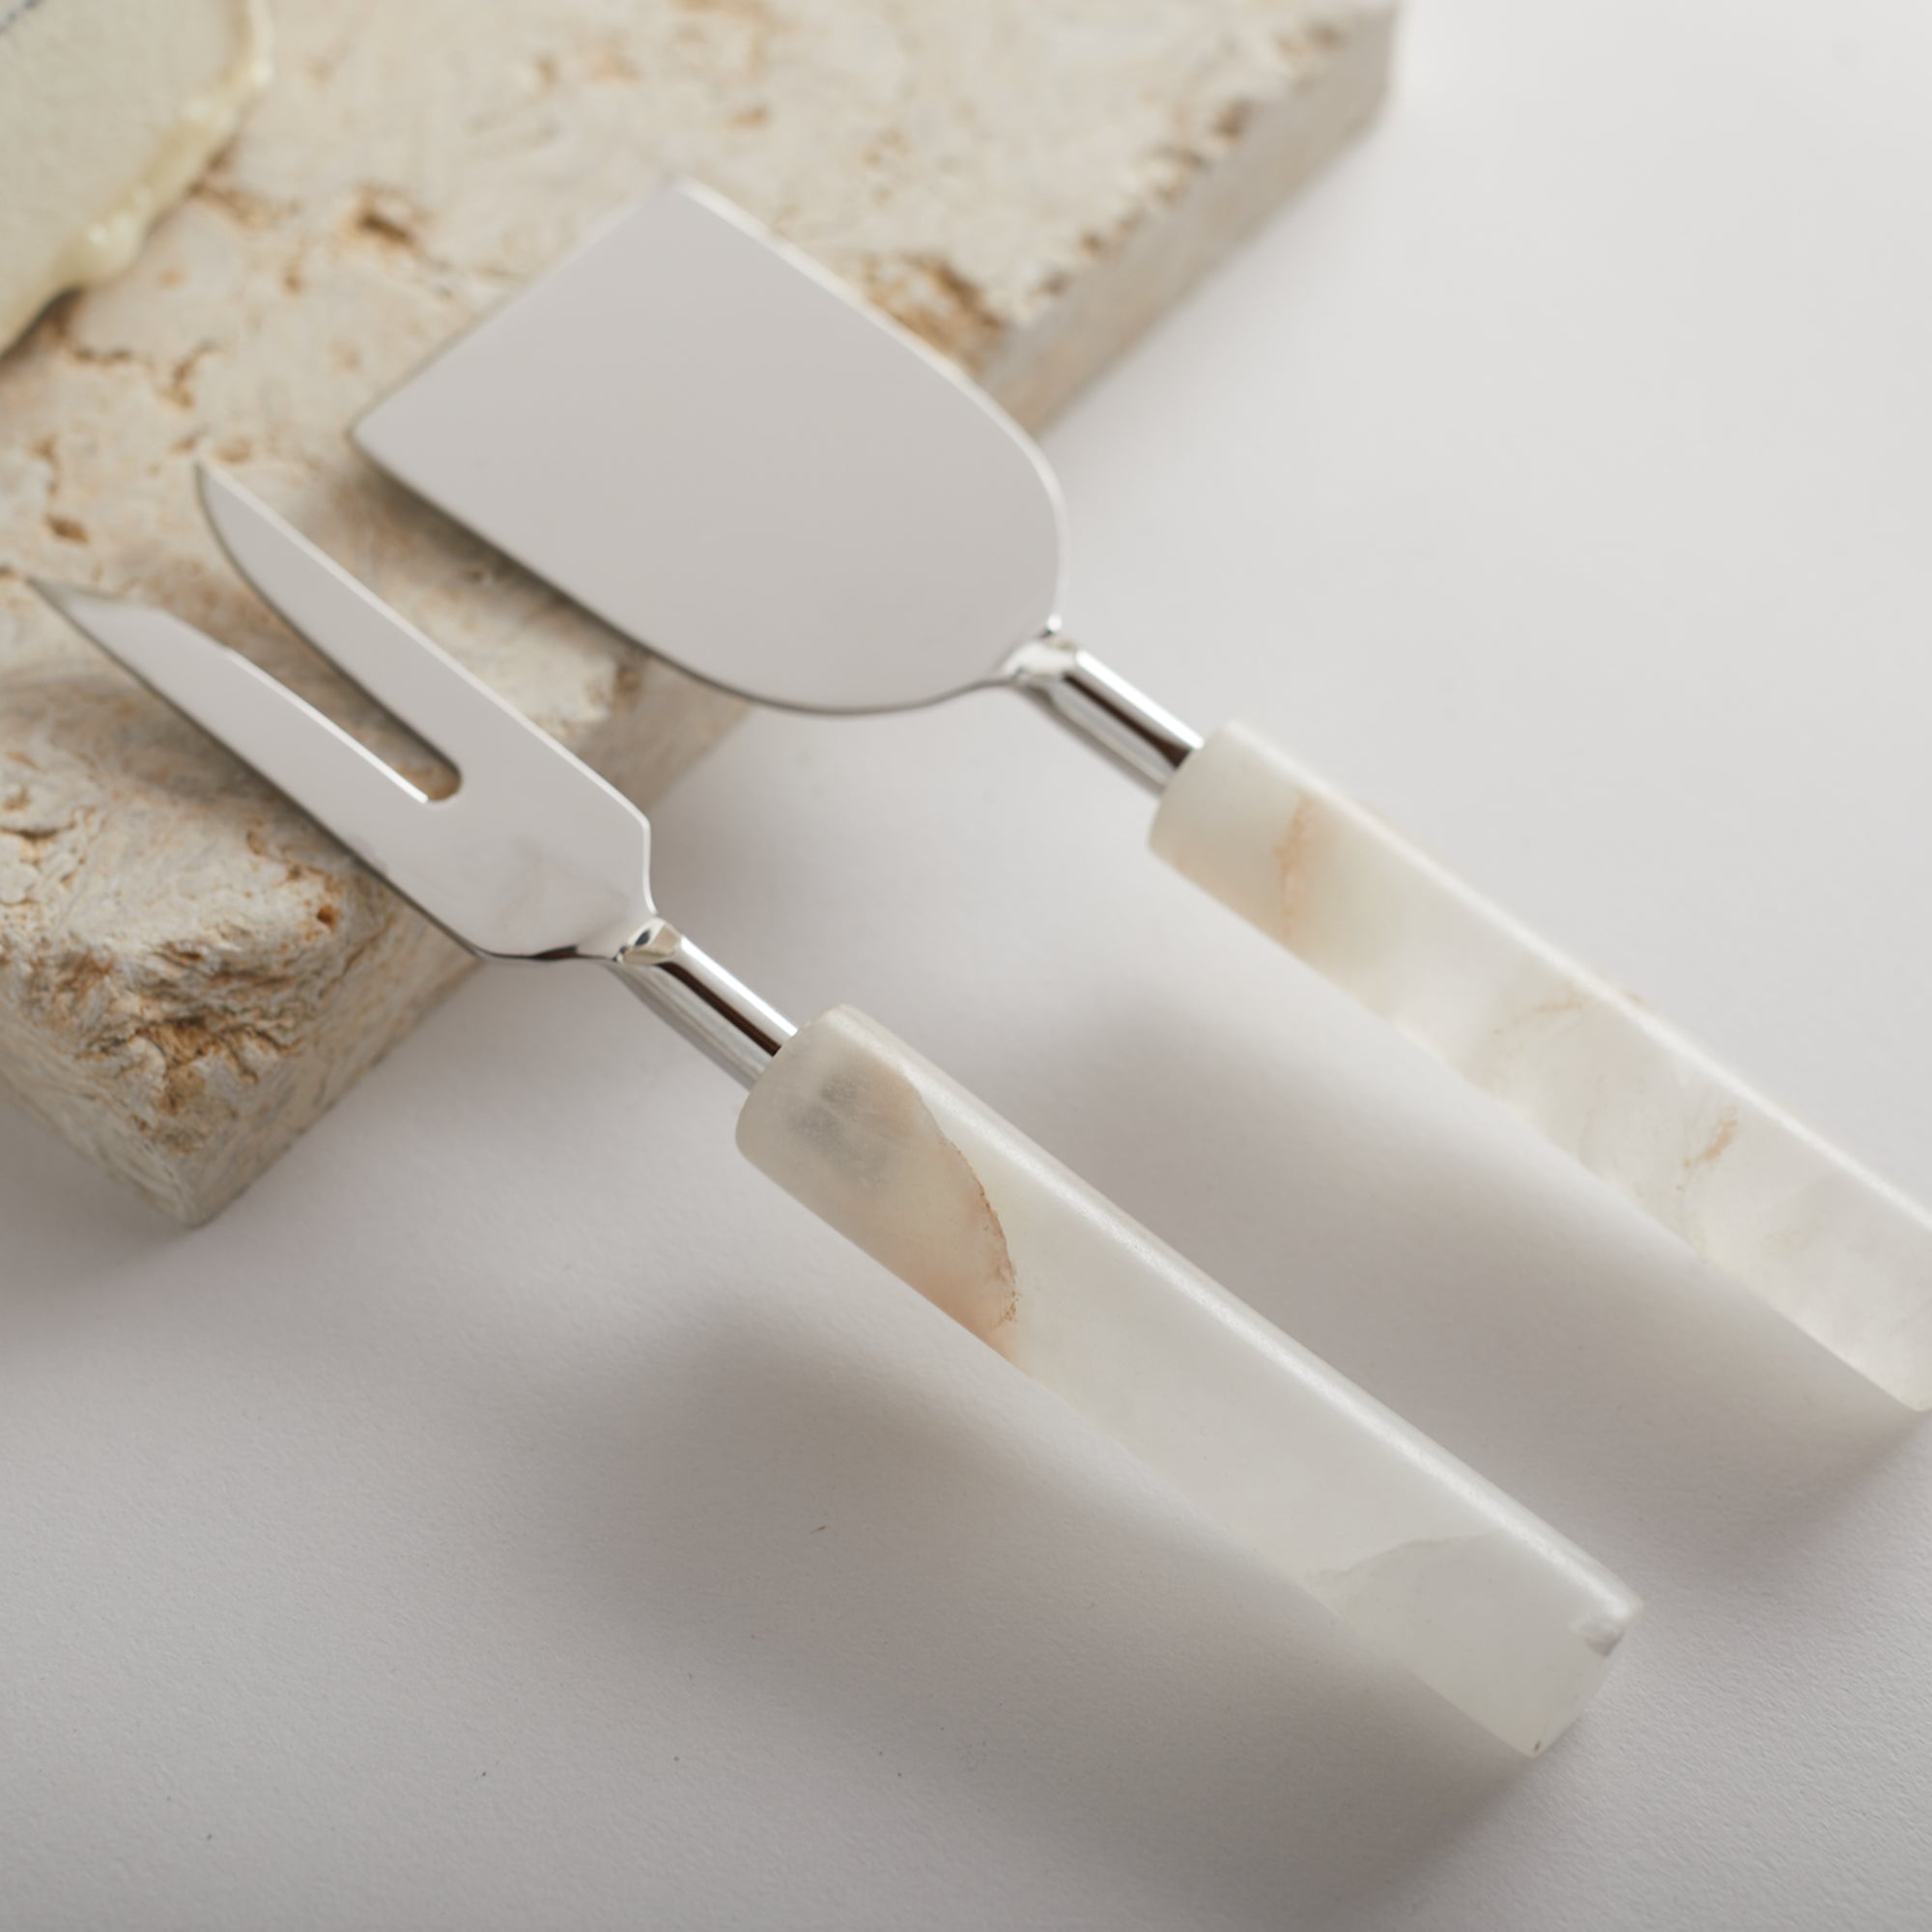 Alabaster cheese knives